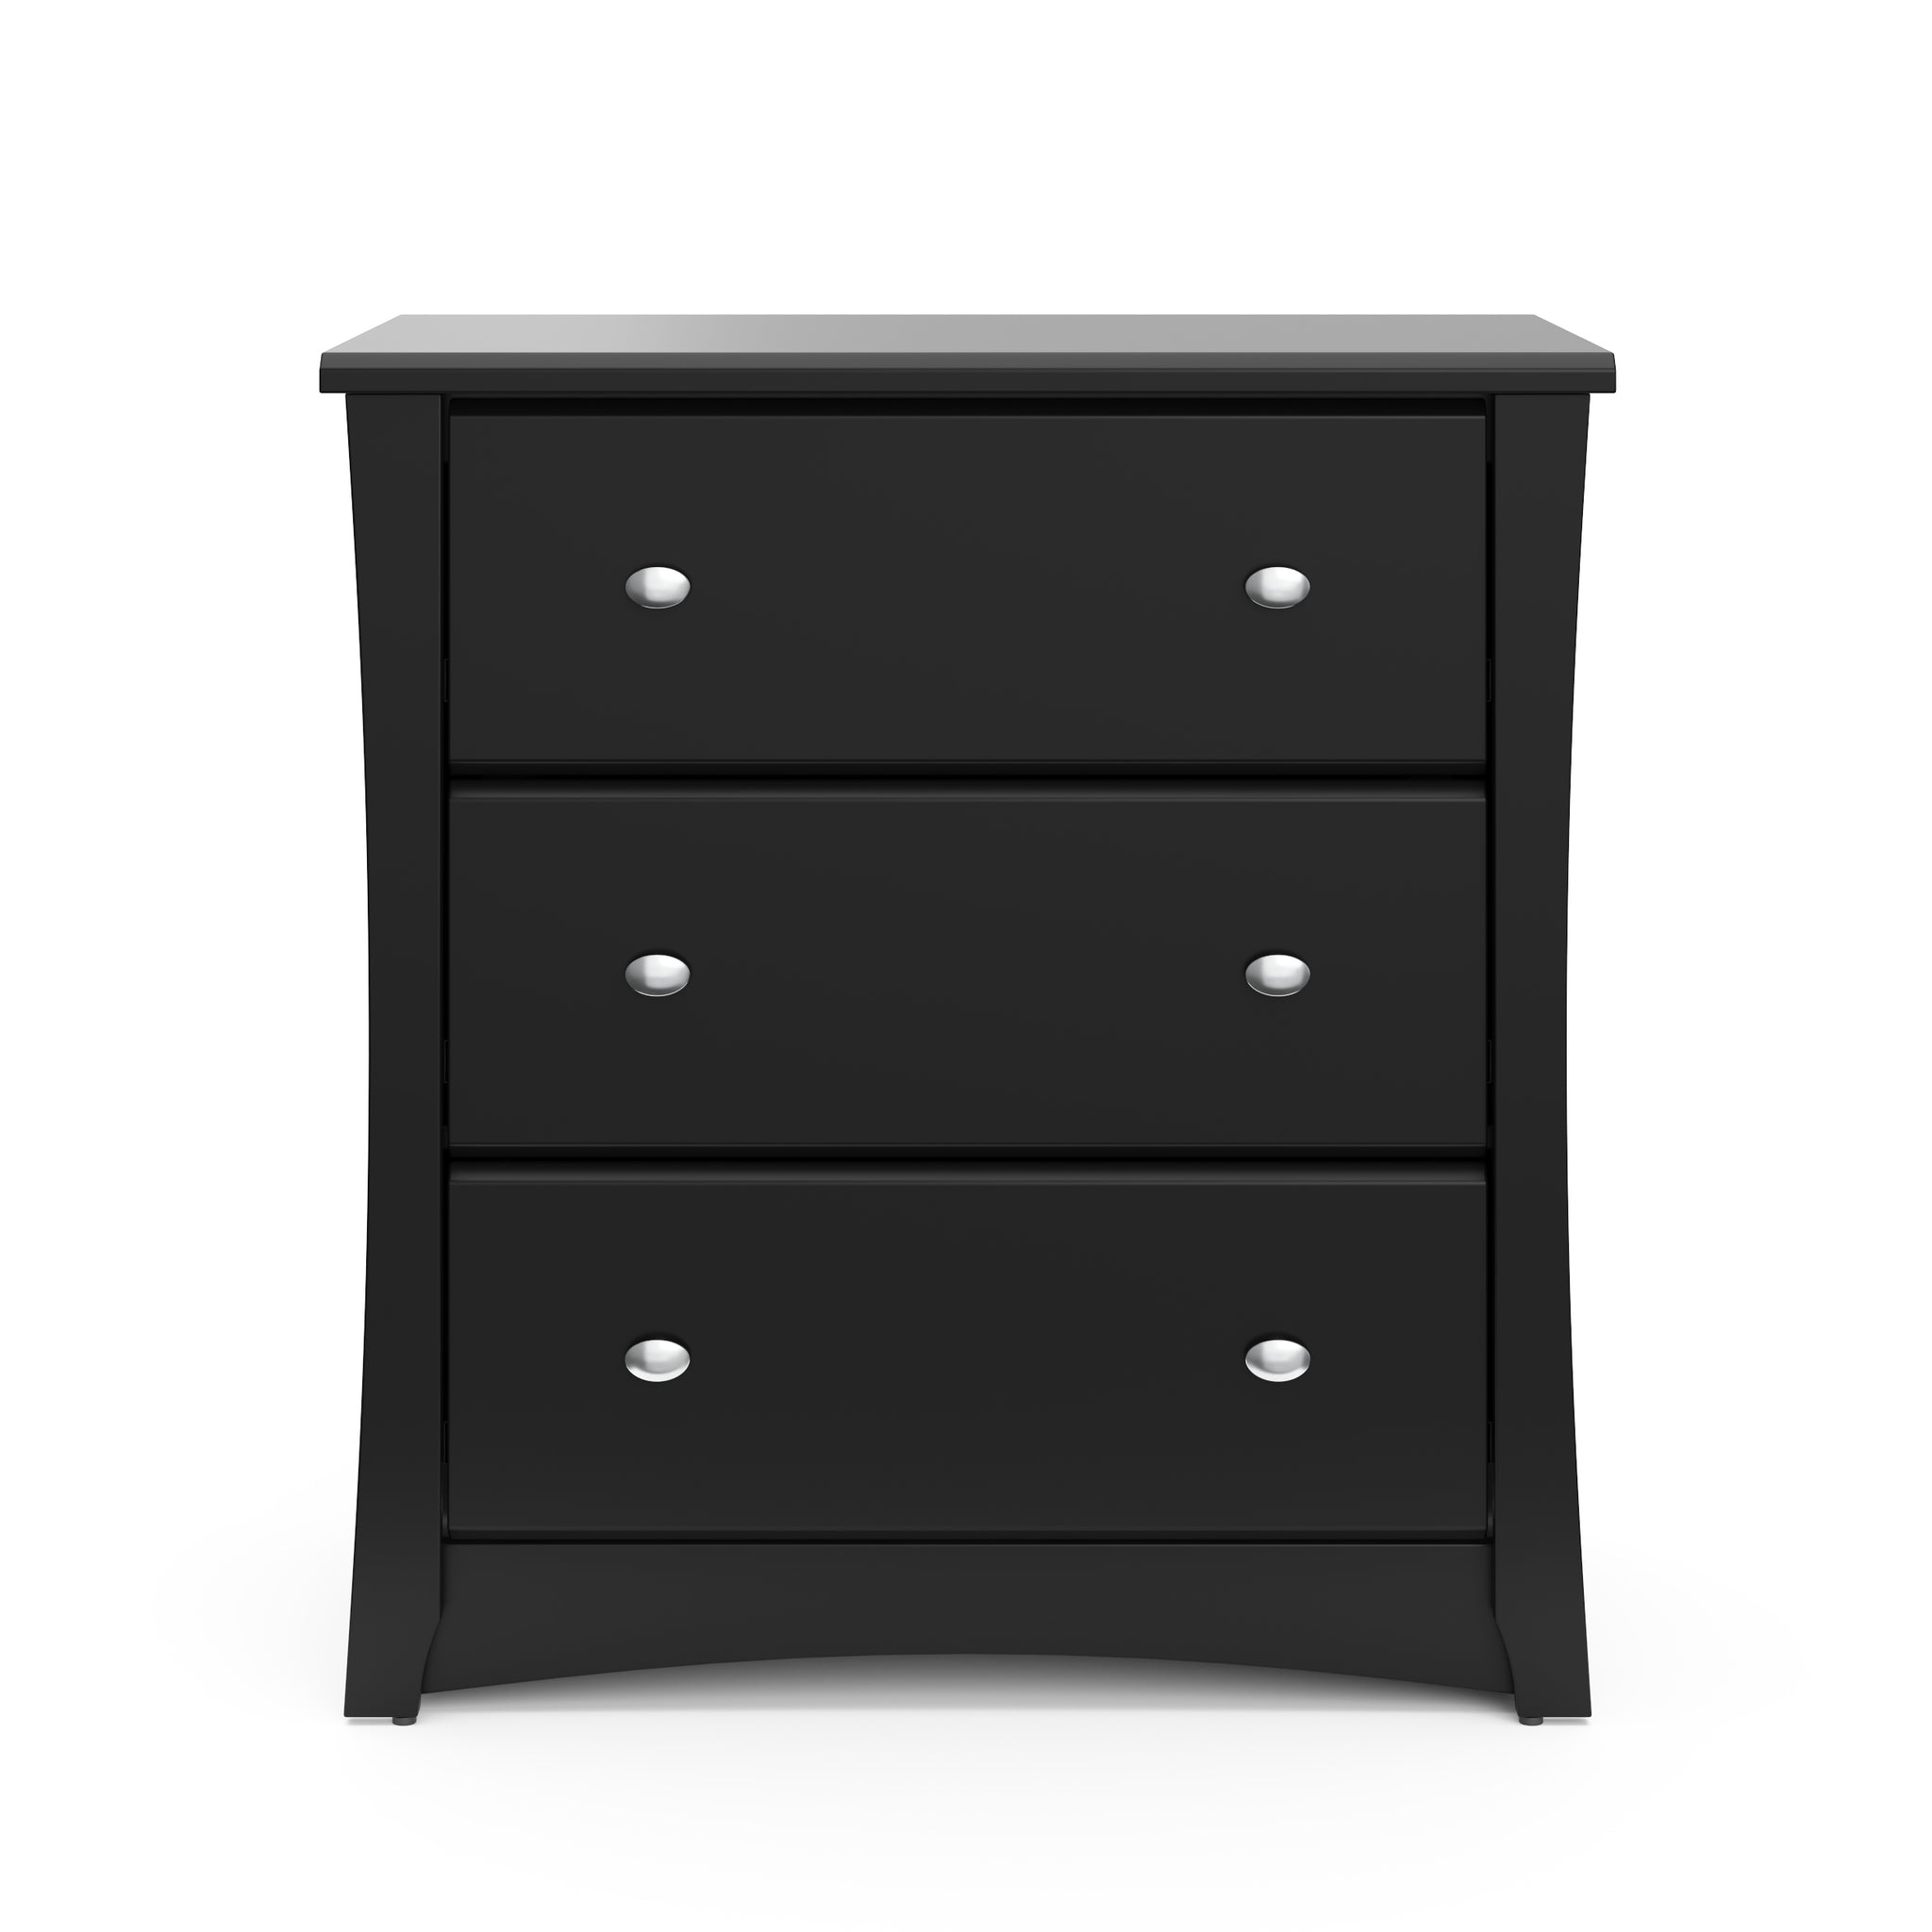 Front view of black 3 drawer chest